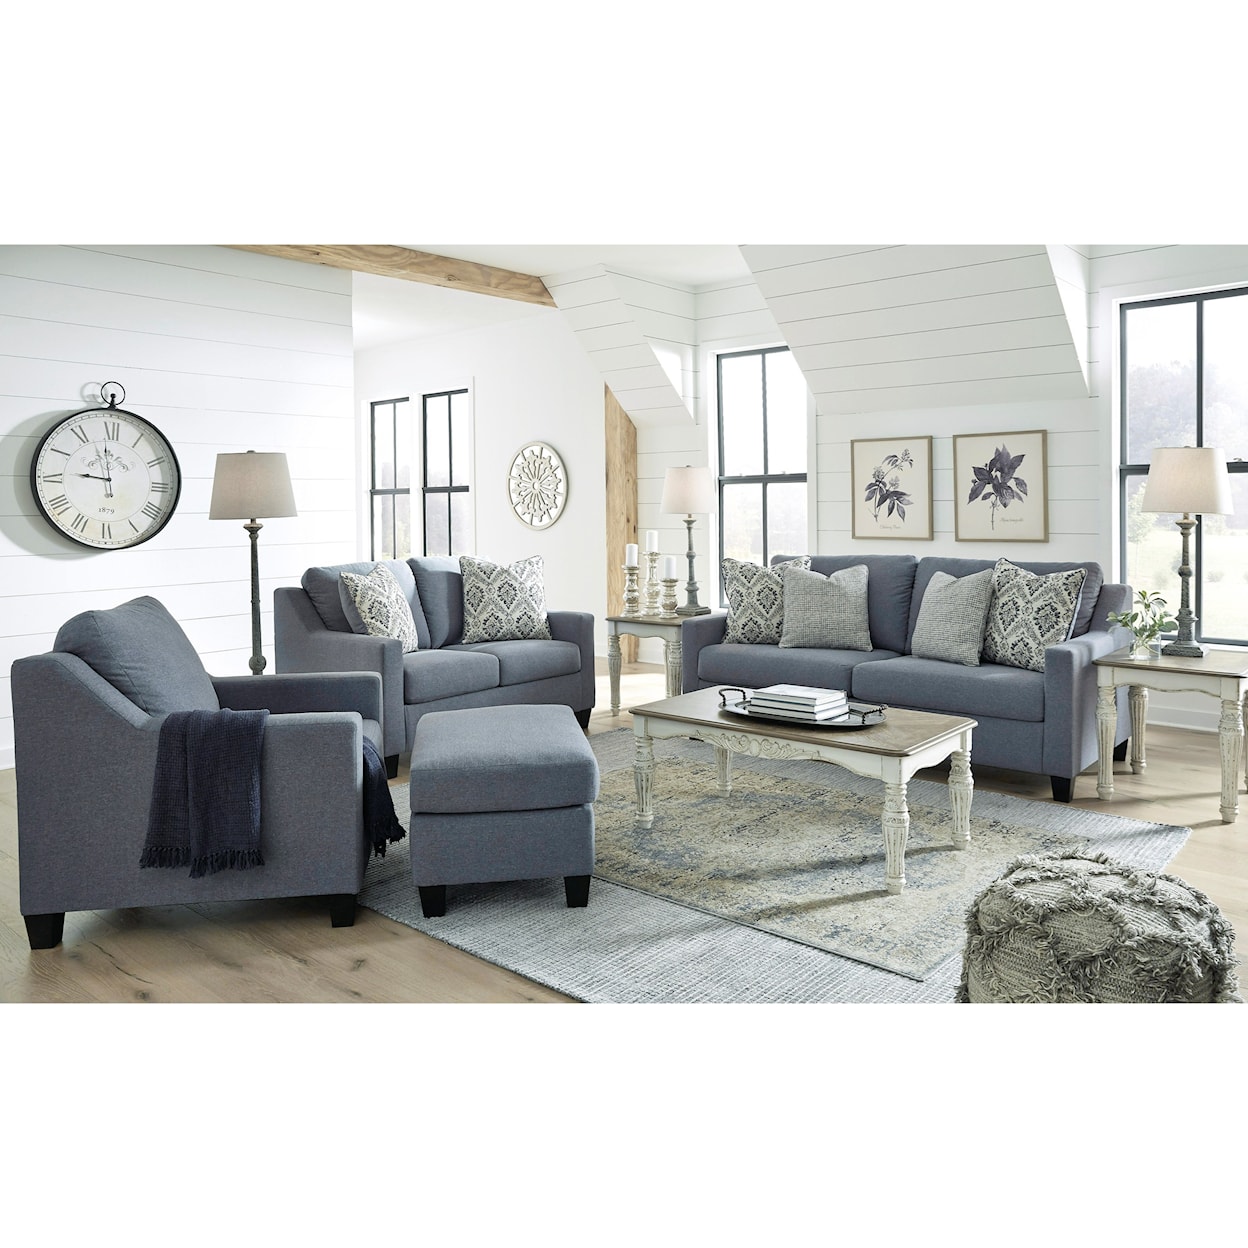 Benchcraft Lemly 4pc living room group